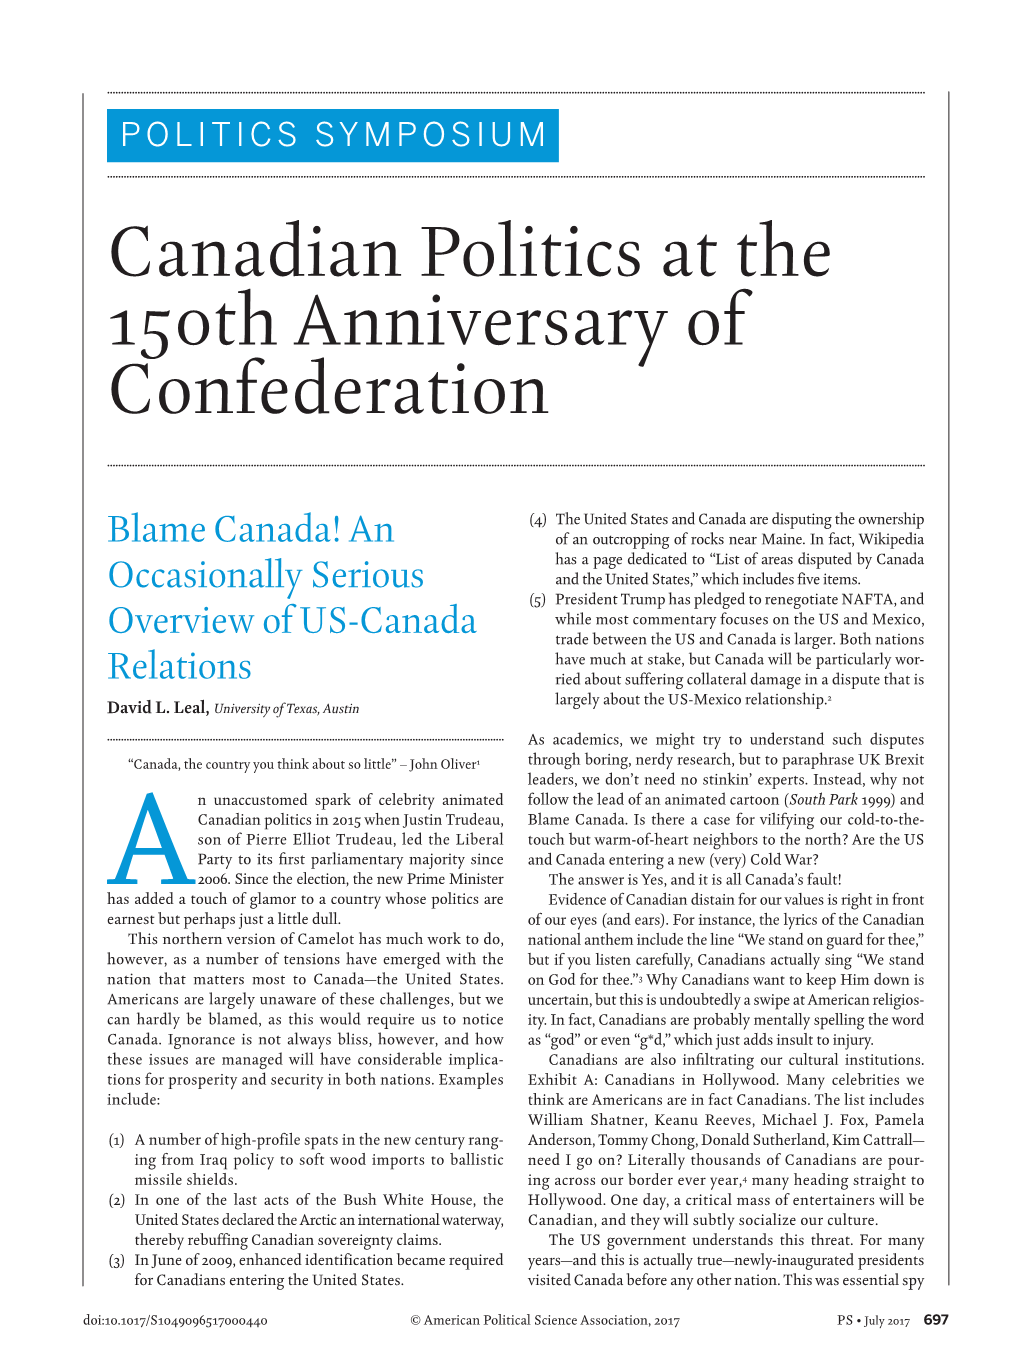 Canadian Politics at the 150Th Anniversary of Confederation